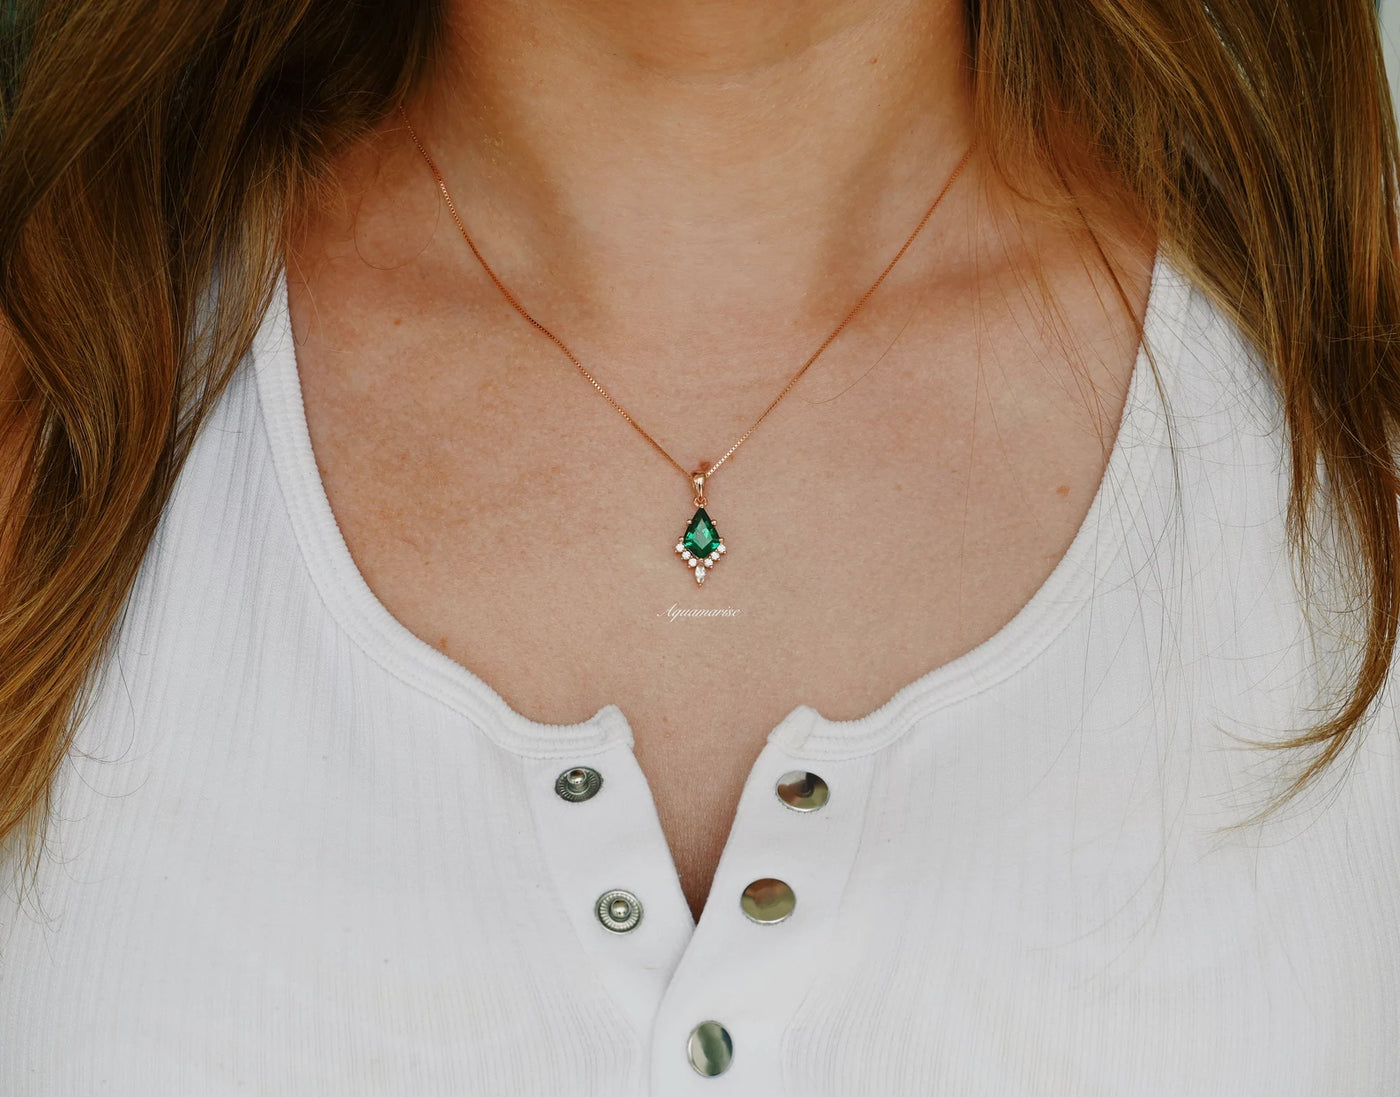 Skye Kite Emerald Necklace For Women- 14K Rose Gold Vermeil Dainty Pendant Necklace Birthstone Geometric Necklace- Anniversary Gift For Her